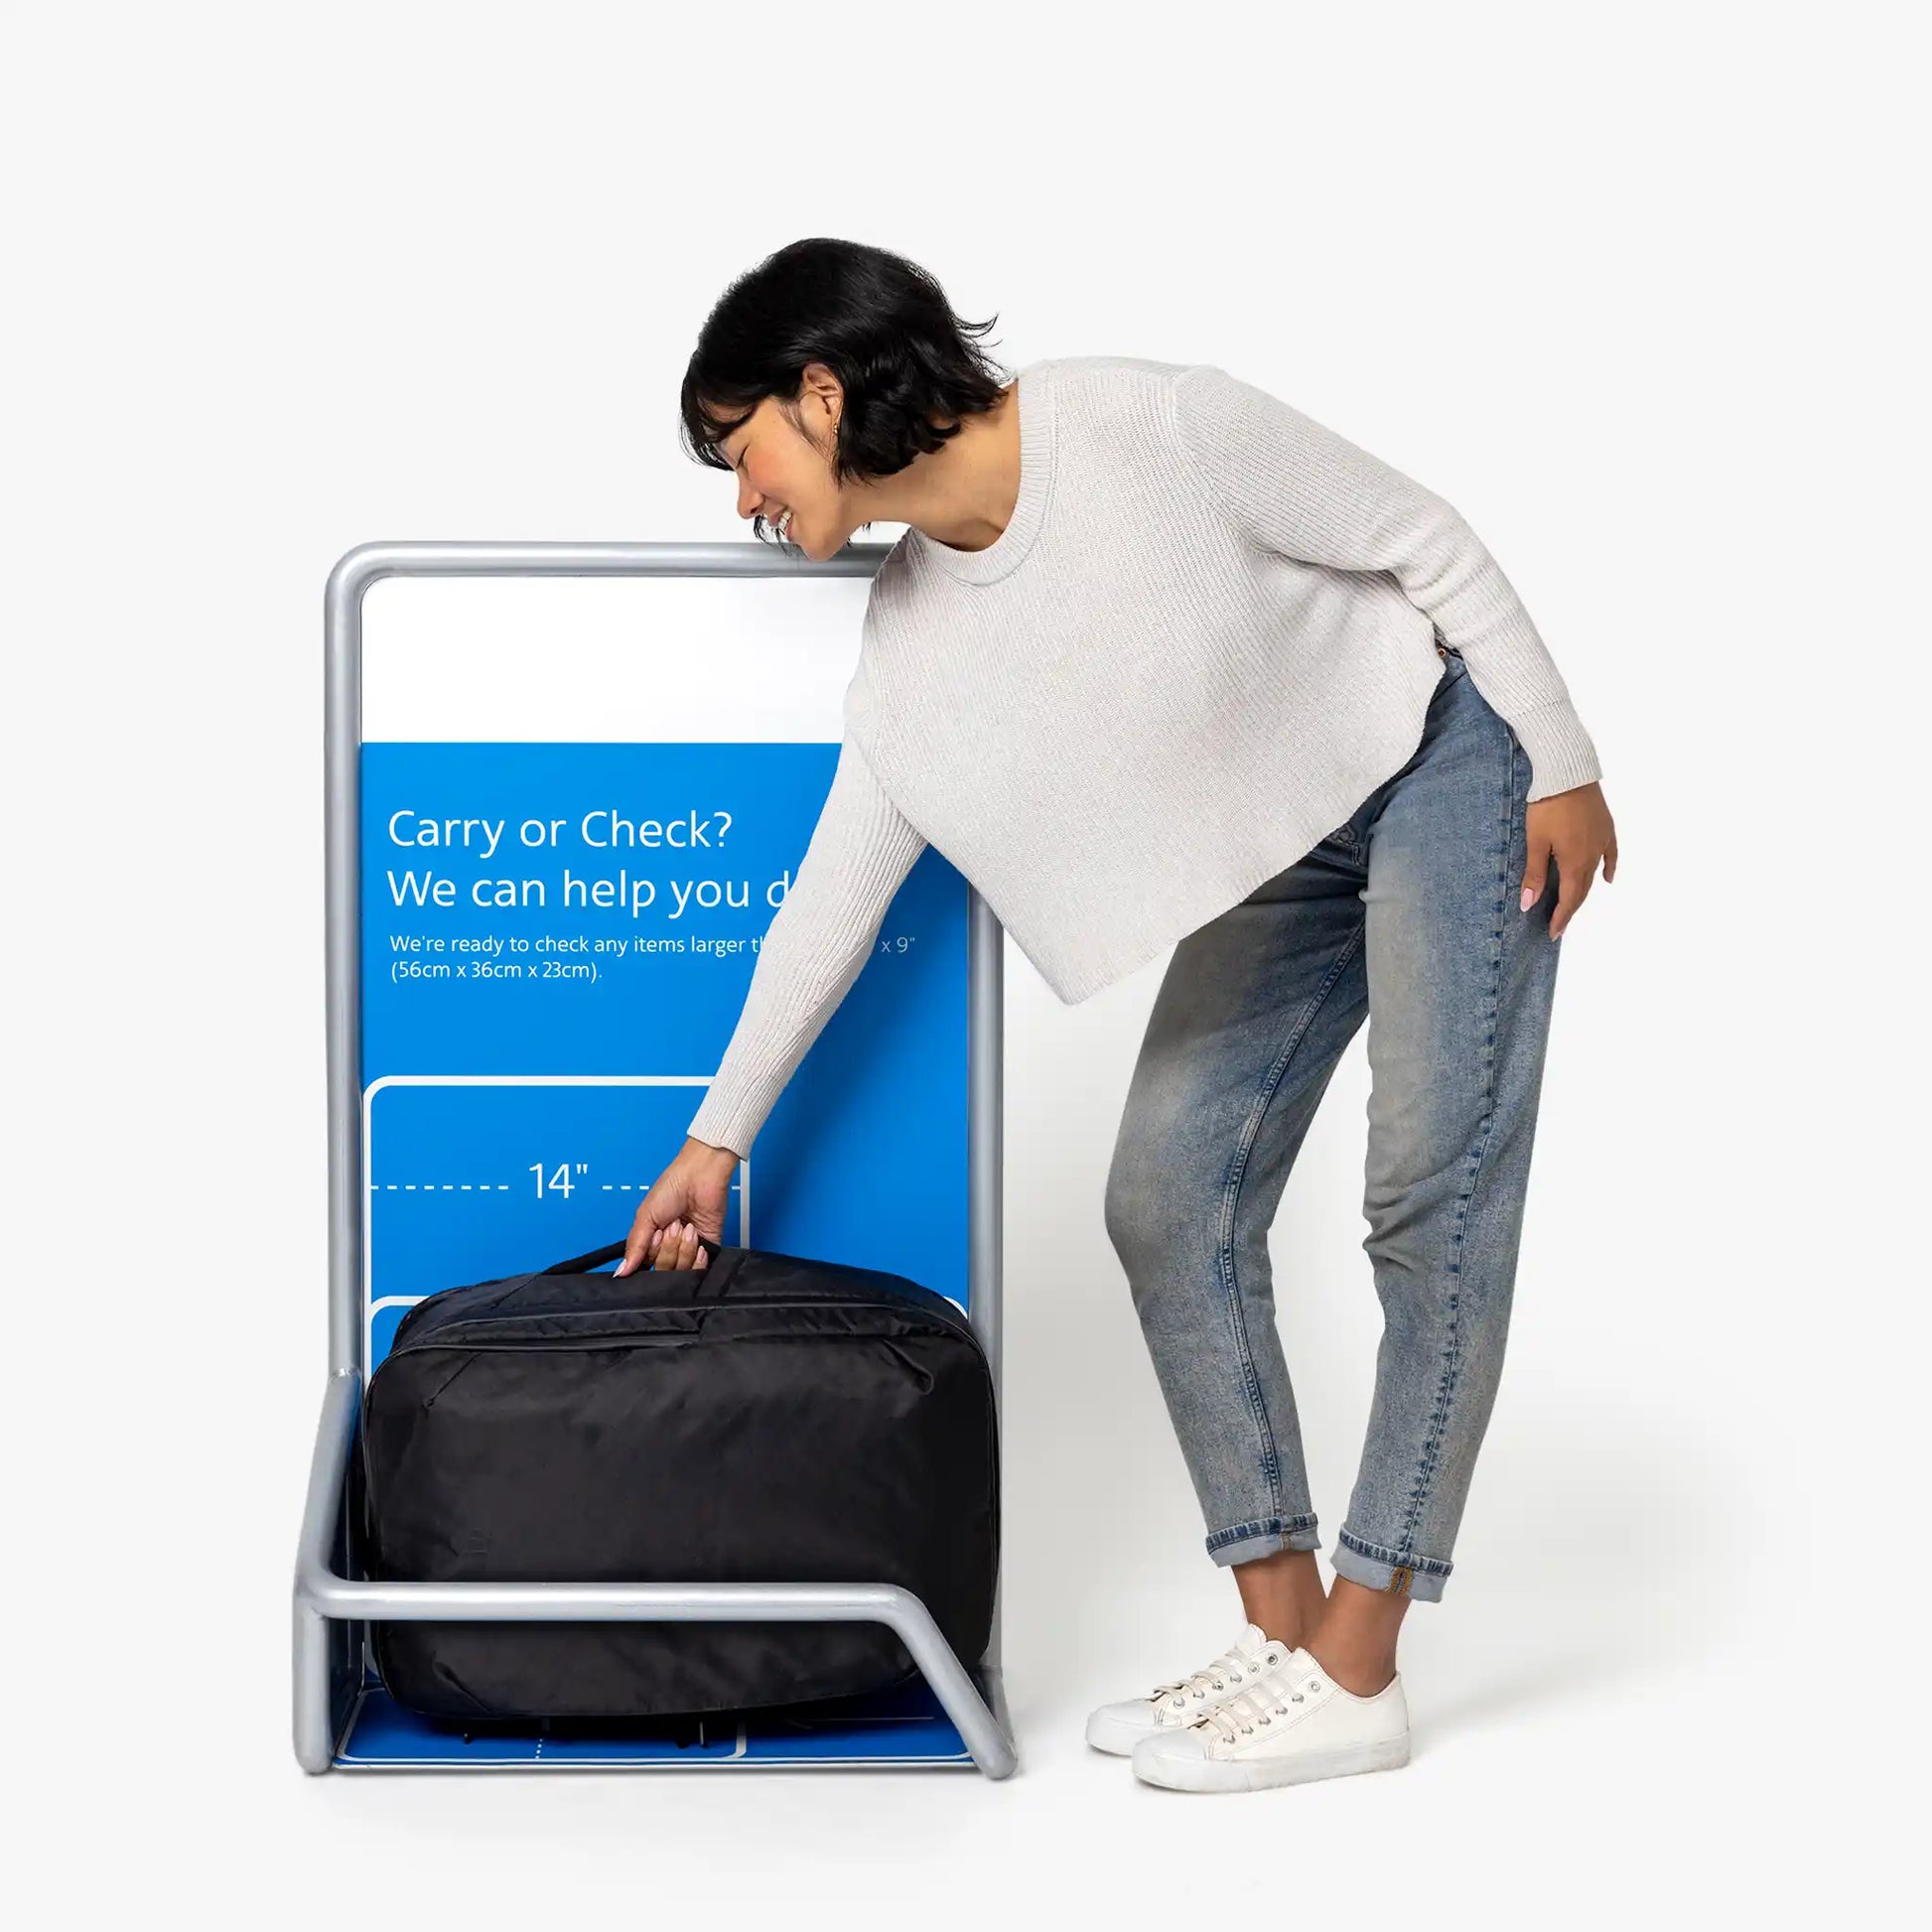 Maximum-sized carry on for domestic, international, and budget airlines